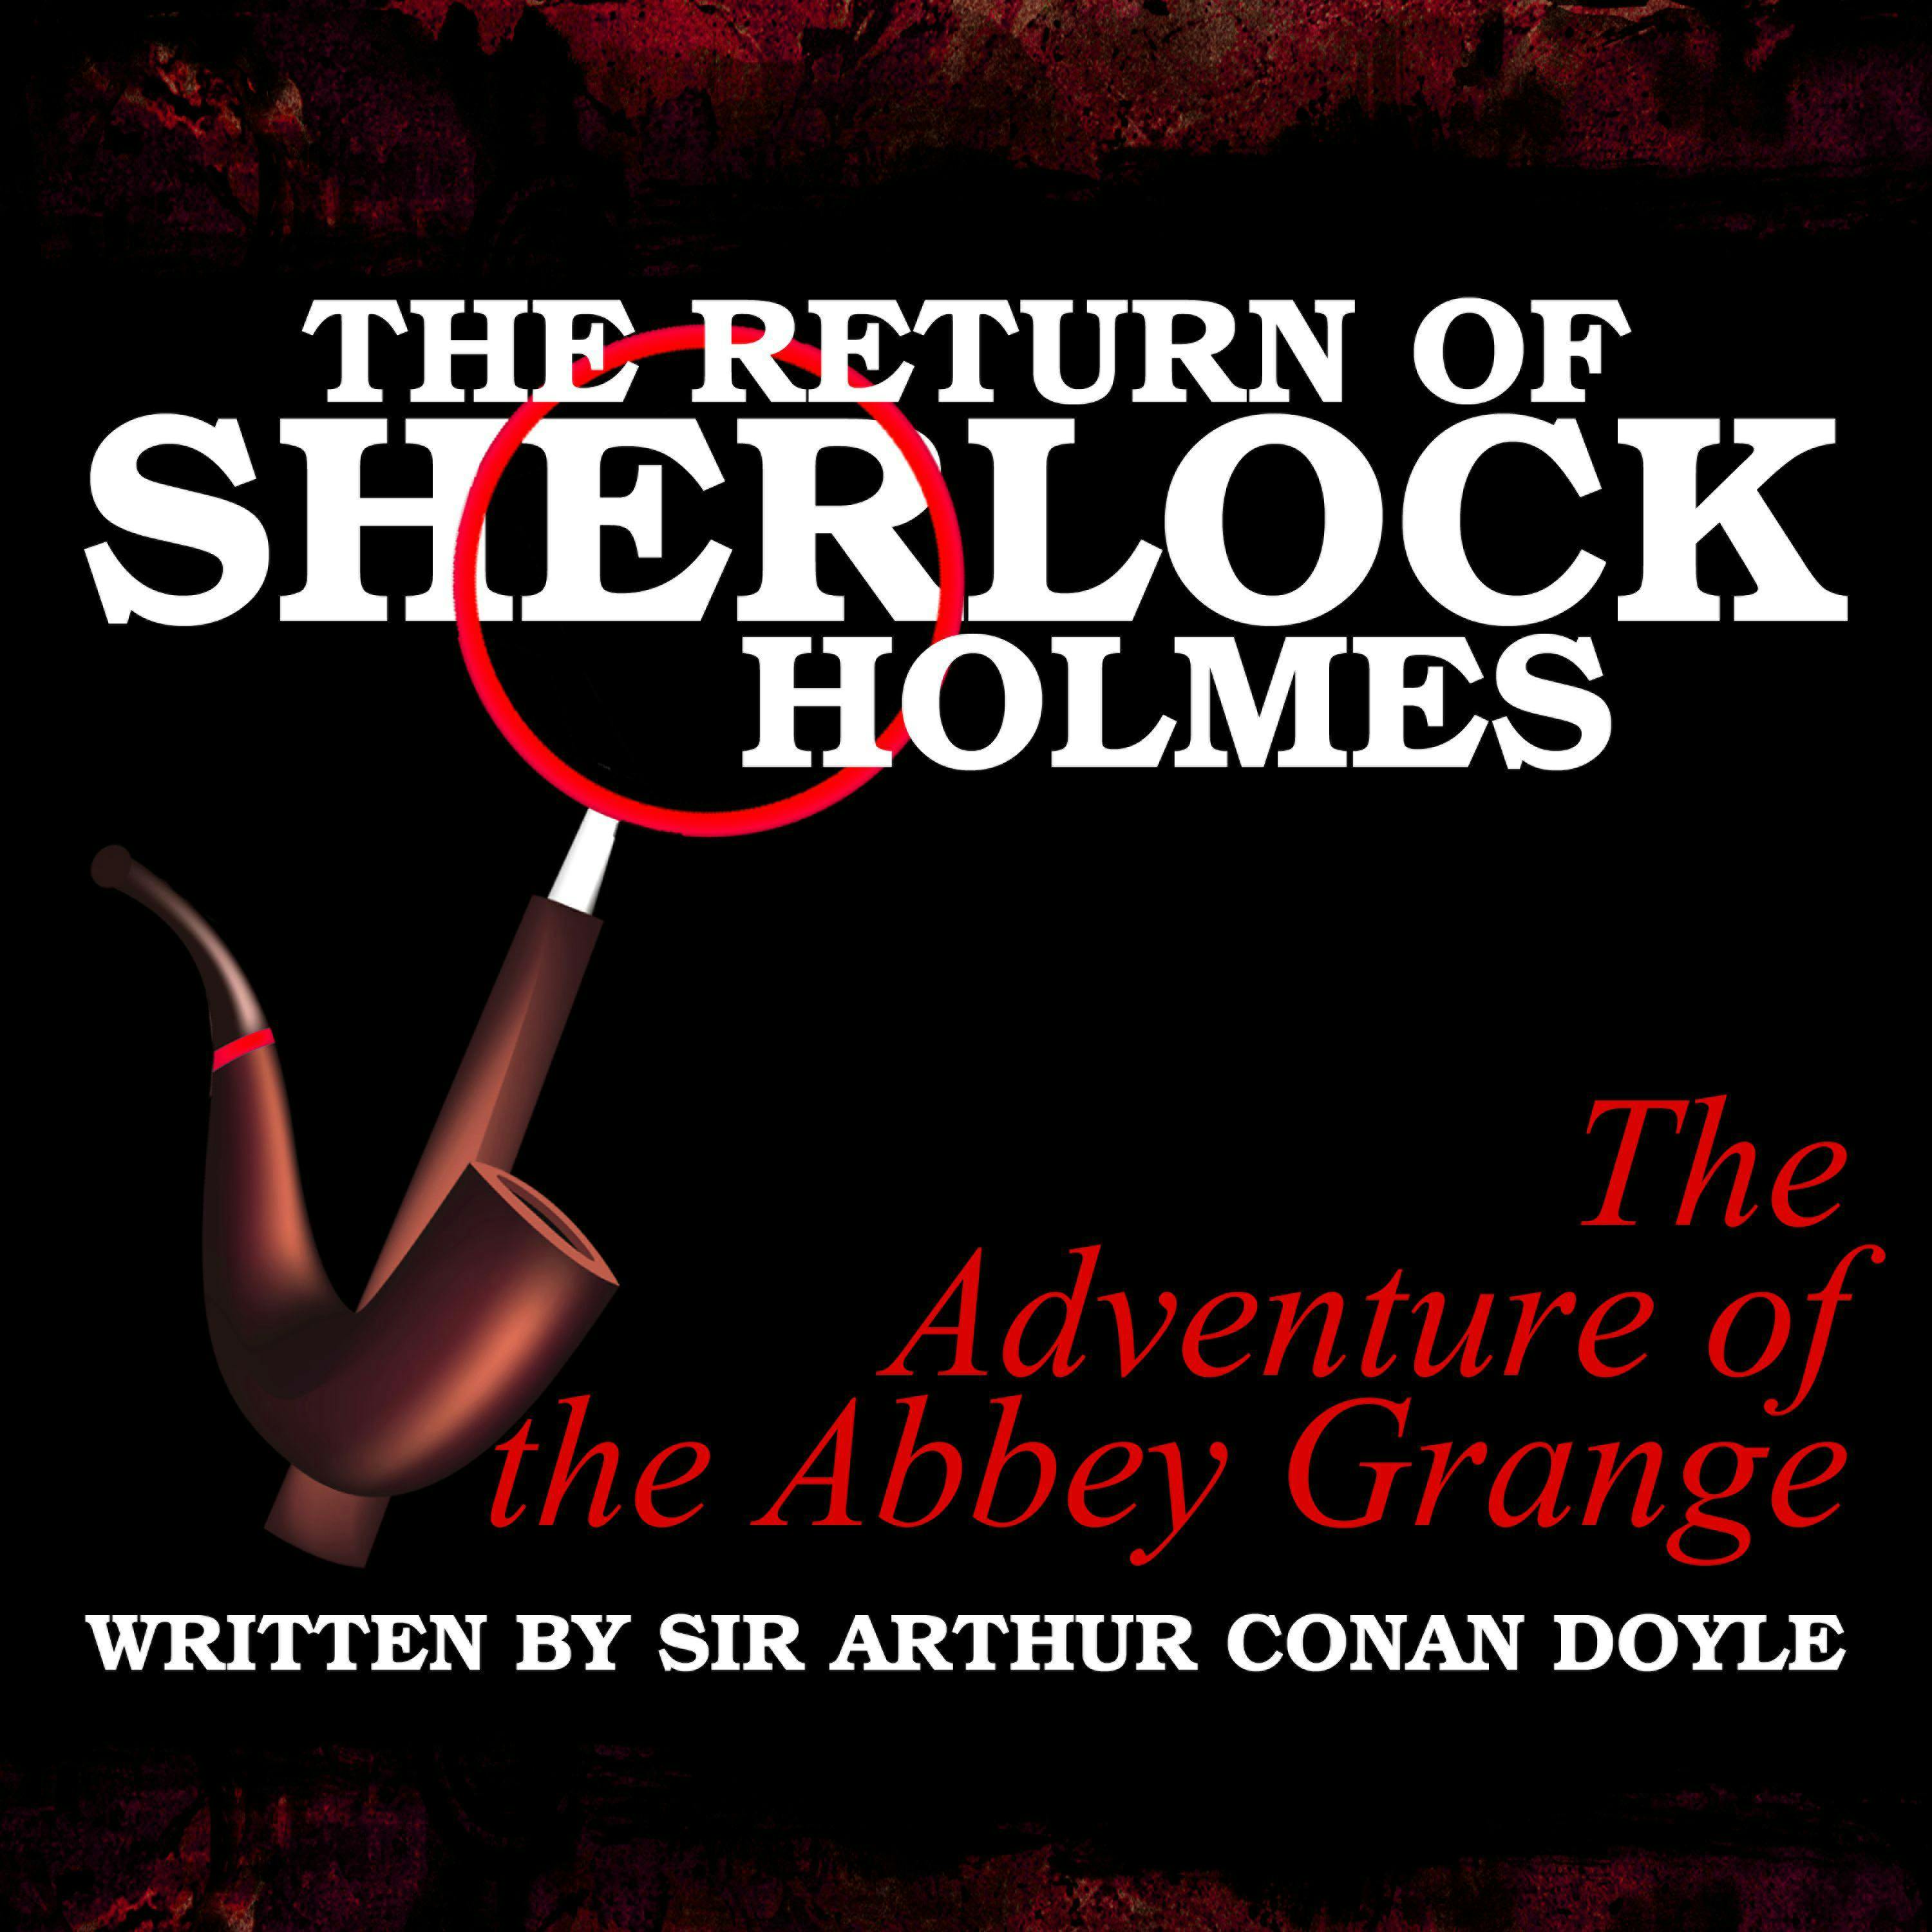 The Return of Sherlock Holmes: The Adventure of the Abbey Grange - undefined